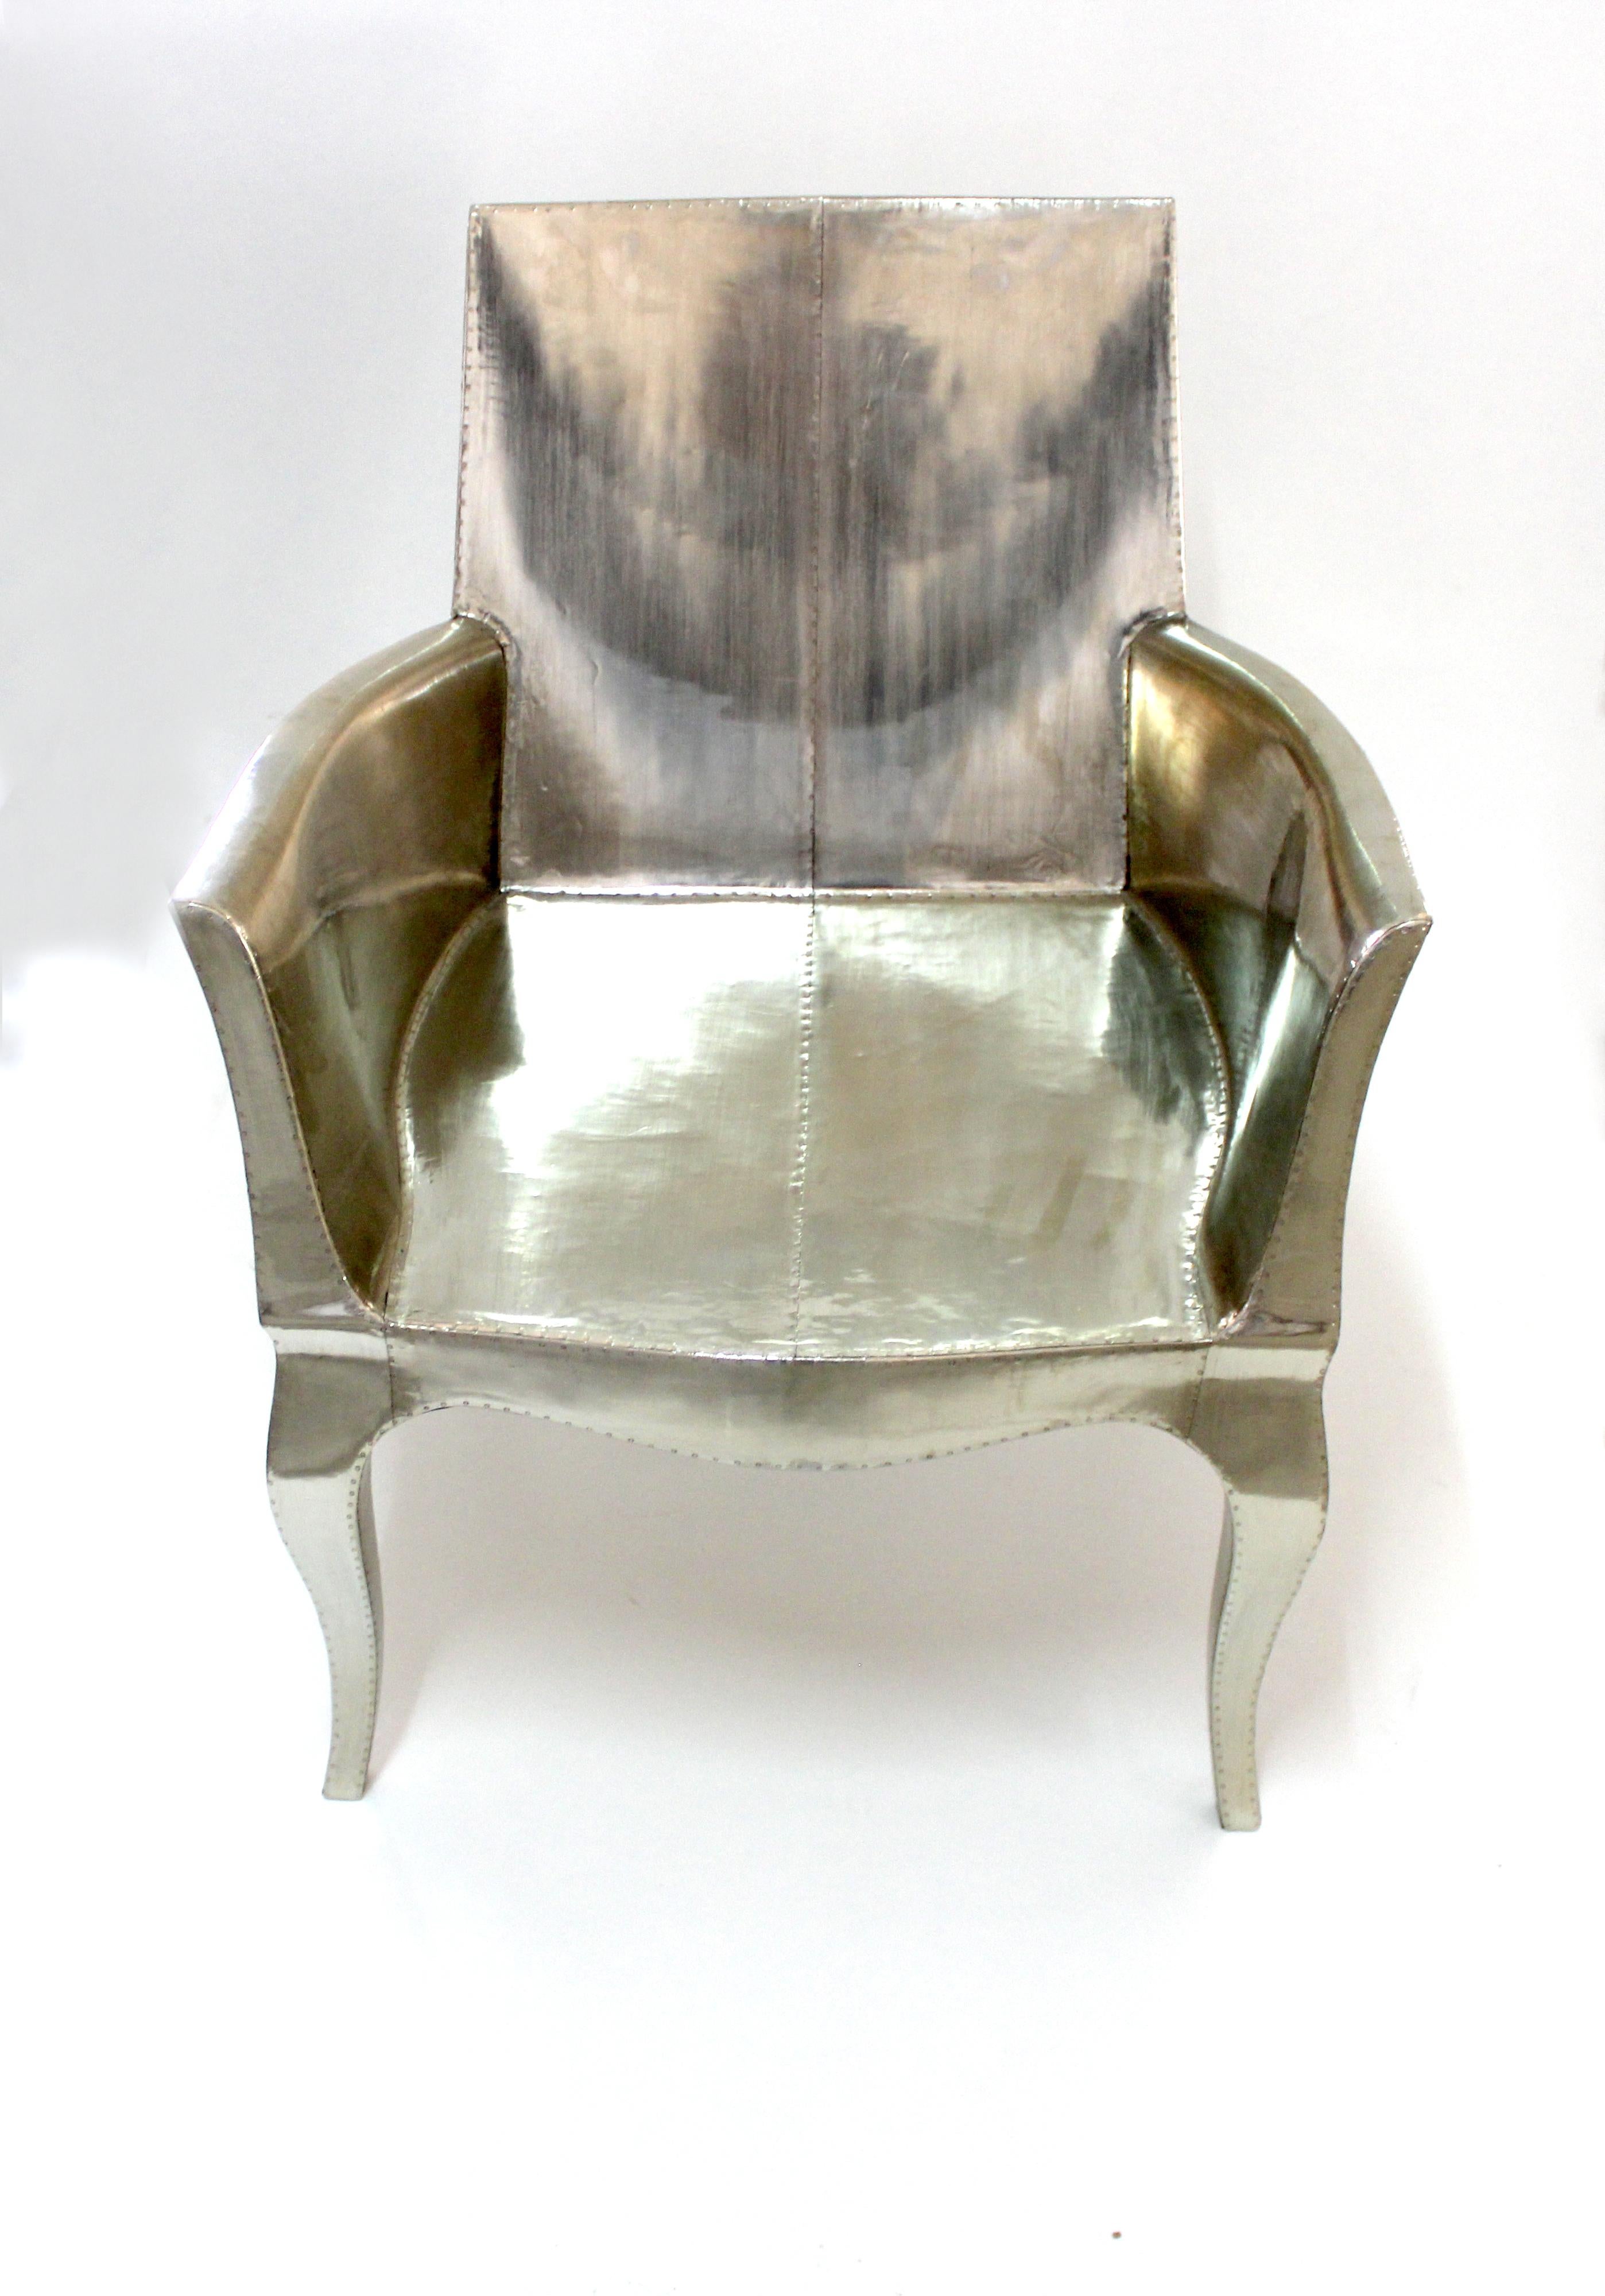 Art Nouveau Chairs in Smooth Antique Bronze by Paul Mathieu for S. Odegard For Sale 7